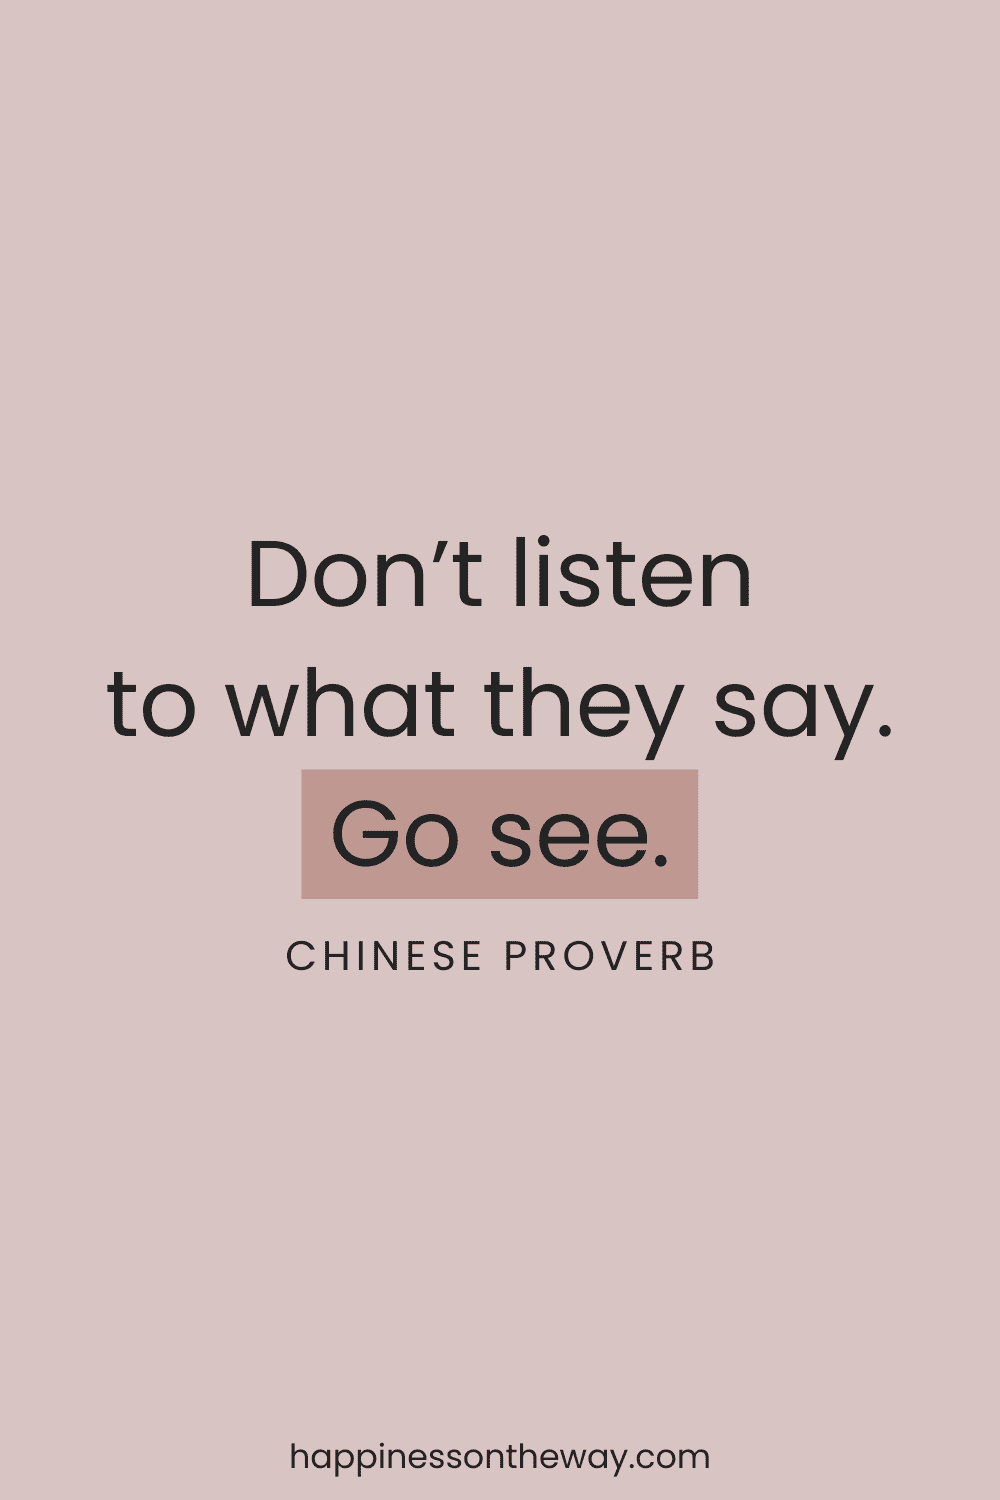 A motivational Chinese proverb 'Don’t listen to what they say. Go see.' displayed in a clean, modern font on a light pink background